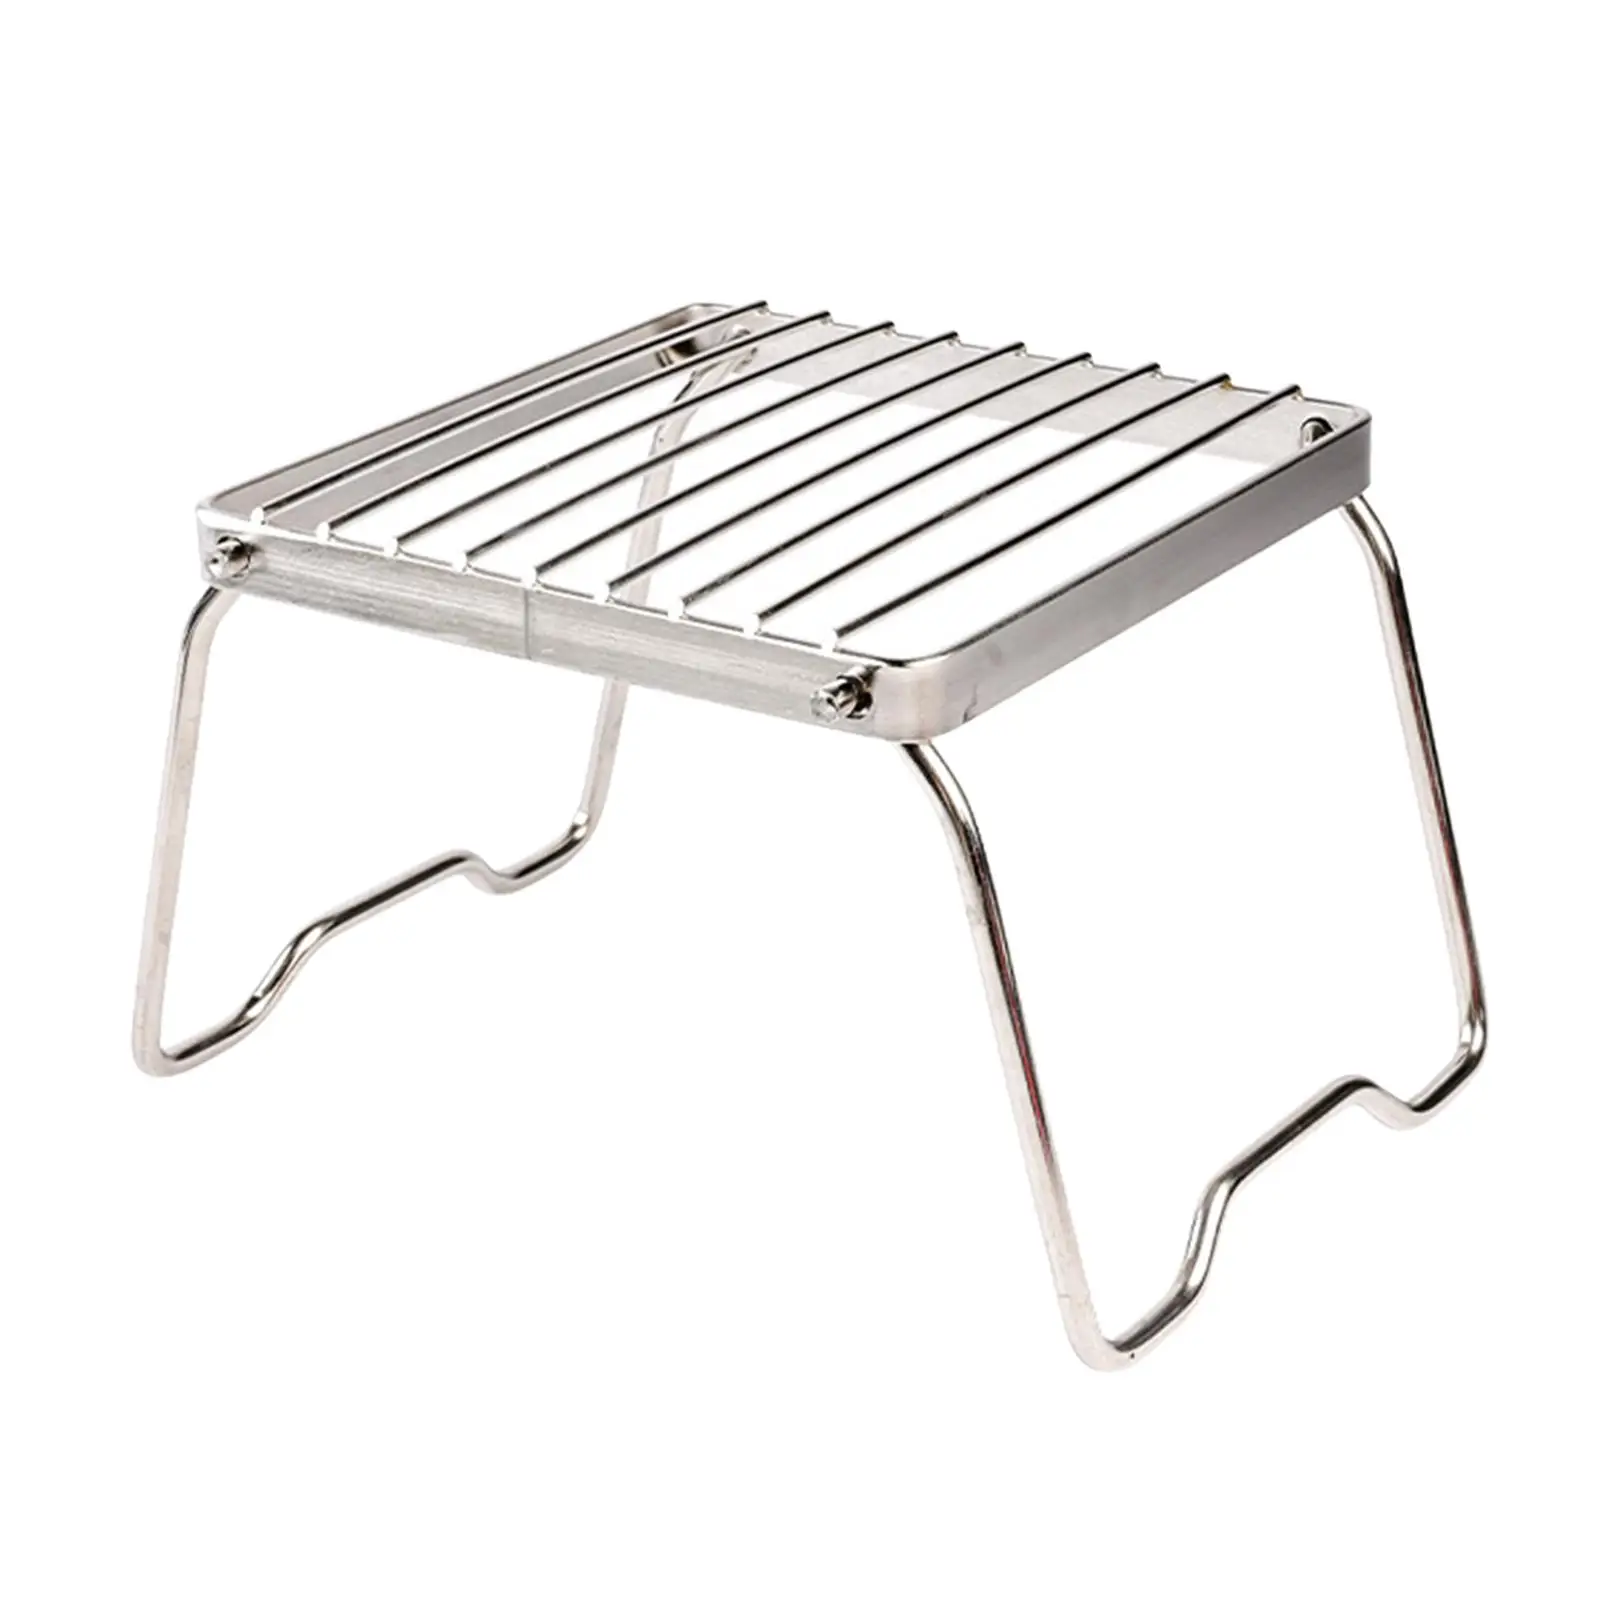 Folding Campfire Grill No Need Installation Cookware Roasting Rack Burner Support for Backyard Outdoor Camping Cooking Travel